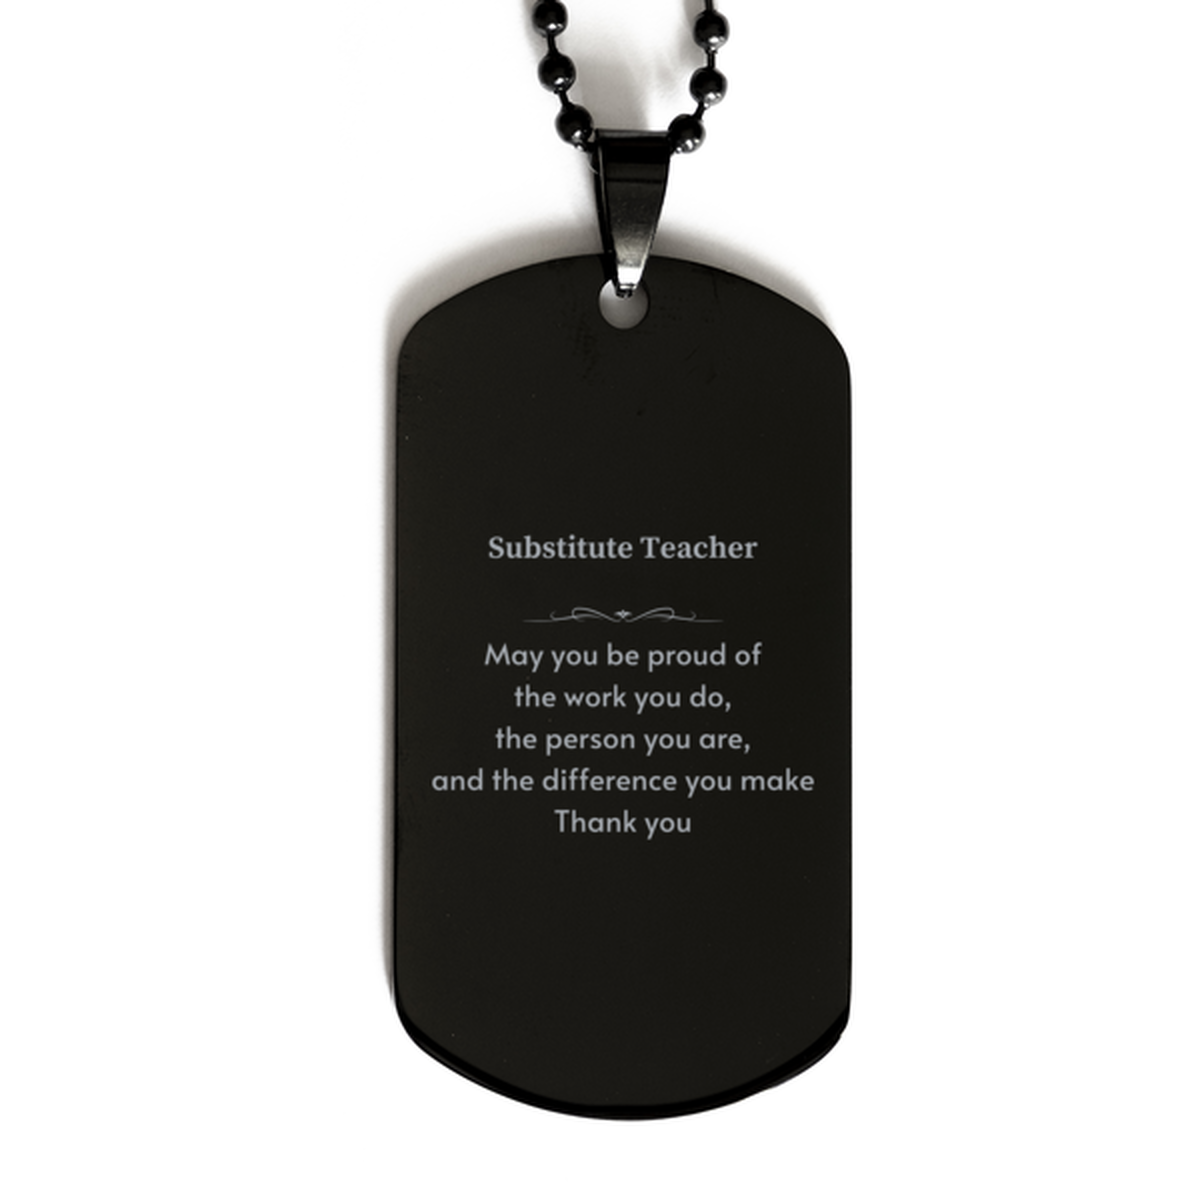 Heartwarming Black Dog Tag Retirement Coworkers Gifts for Substitute Teacher, Substitute Teacher May You be proud of the work you do, the person you are Gifts for Boss Men Women Friends